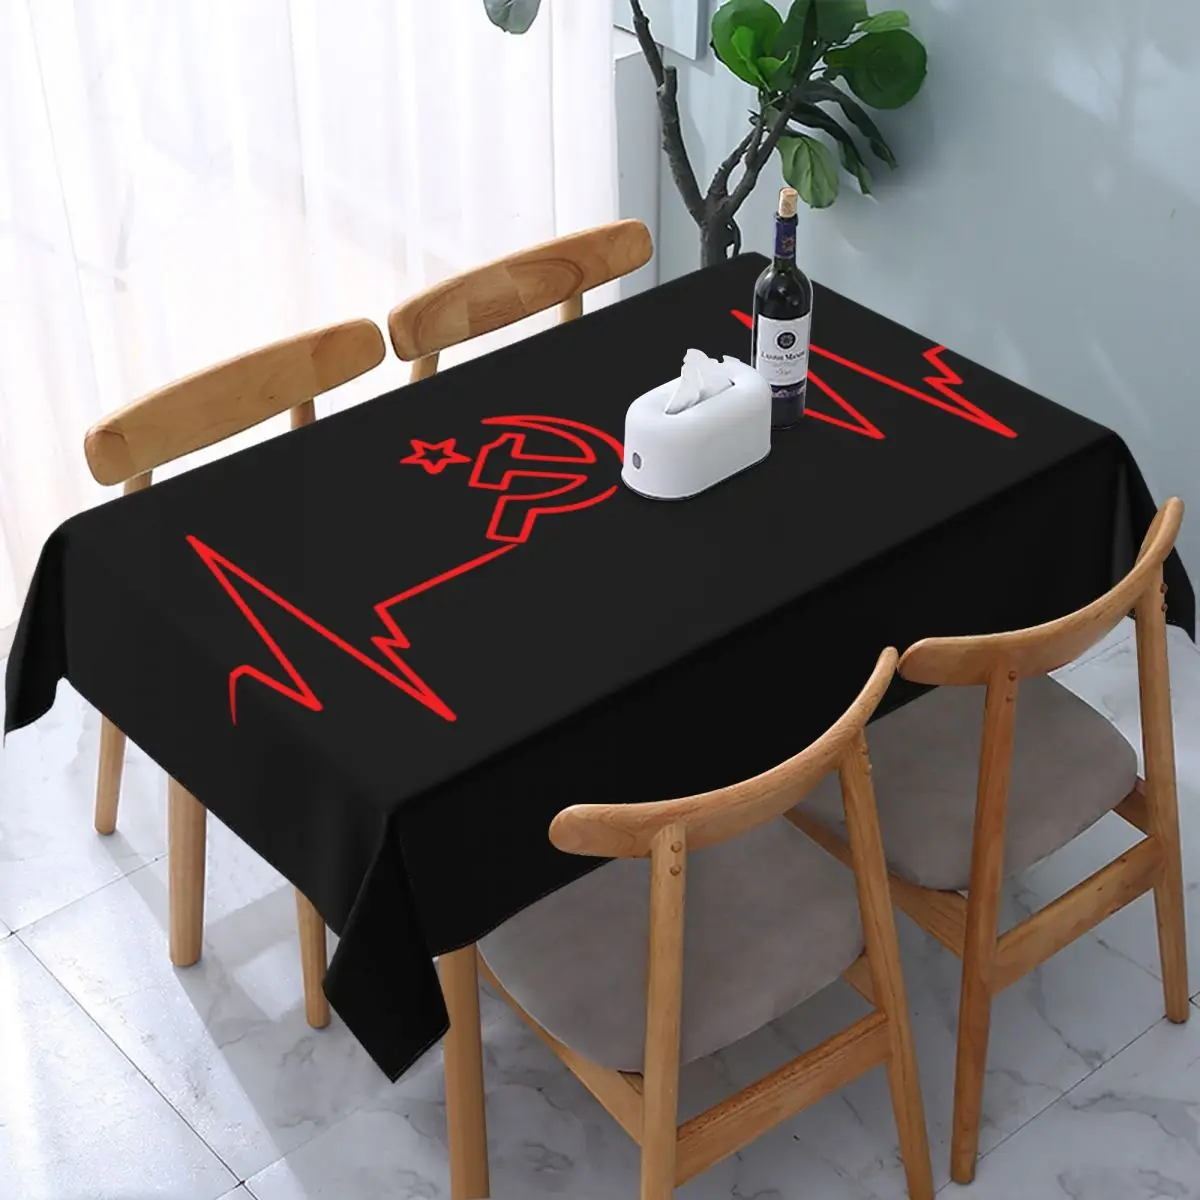 

Rectangular Oilproof Heartbeat Rossia Russia CCCP Table Cover Elastic USSR Table Cloth Backed Edge Tablecloth for Dining